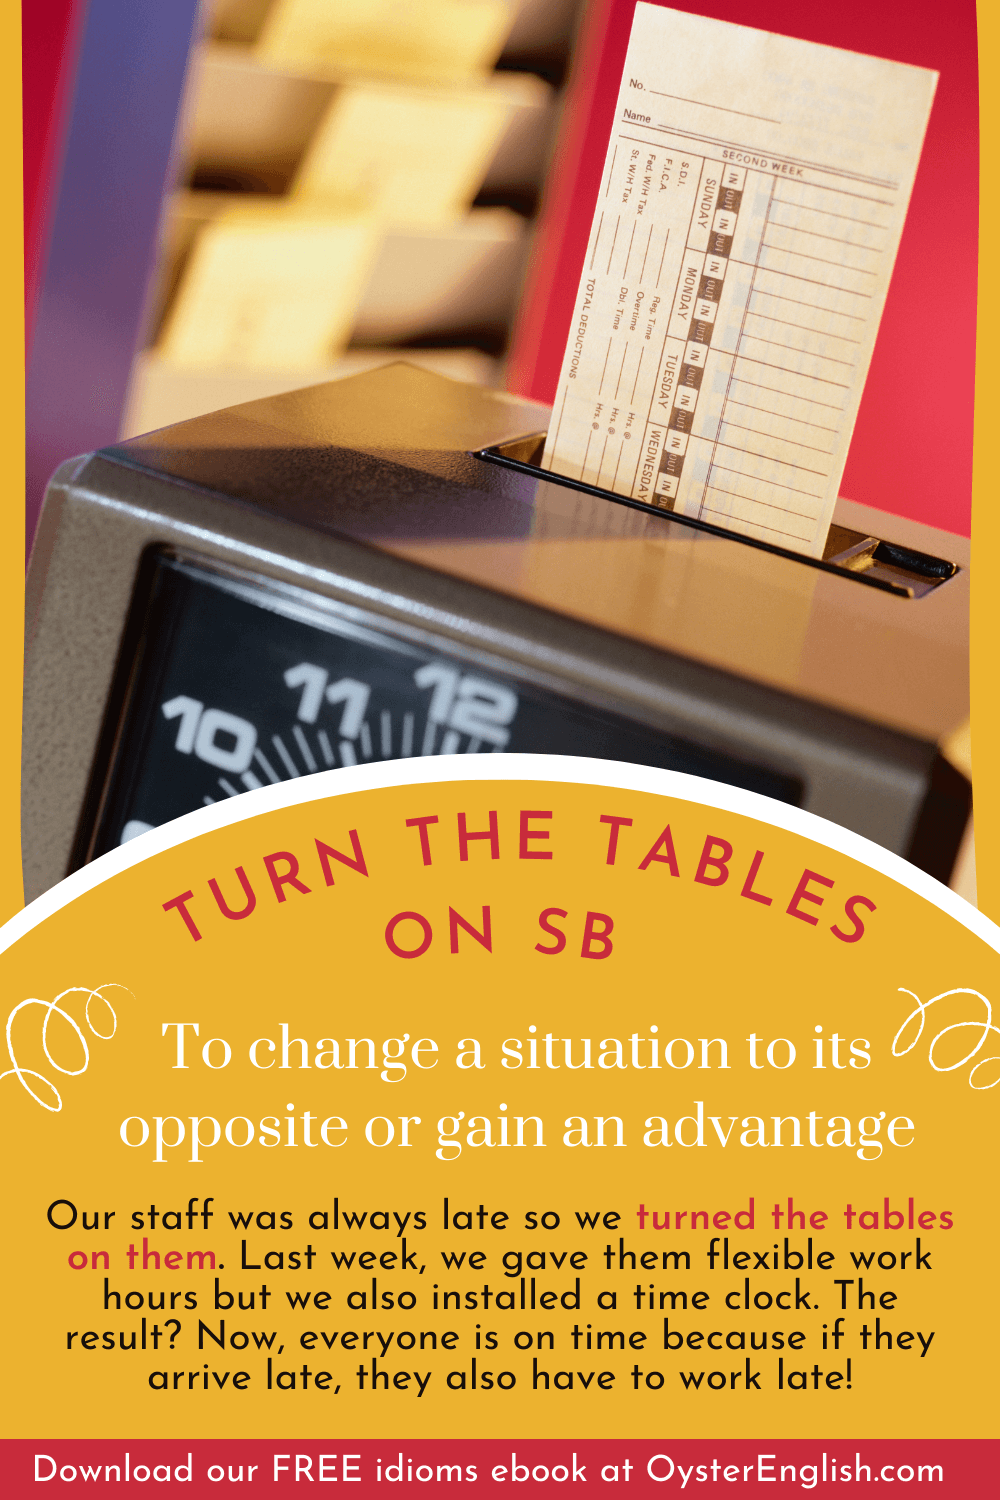 idiom turn the tables on someone